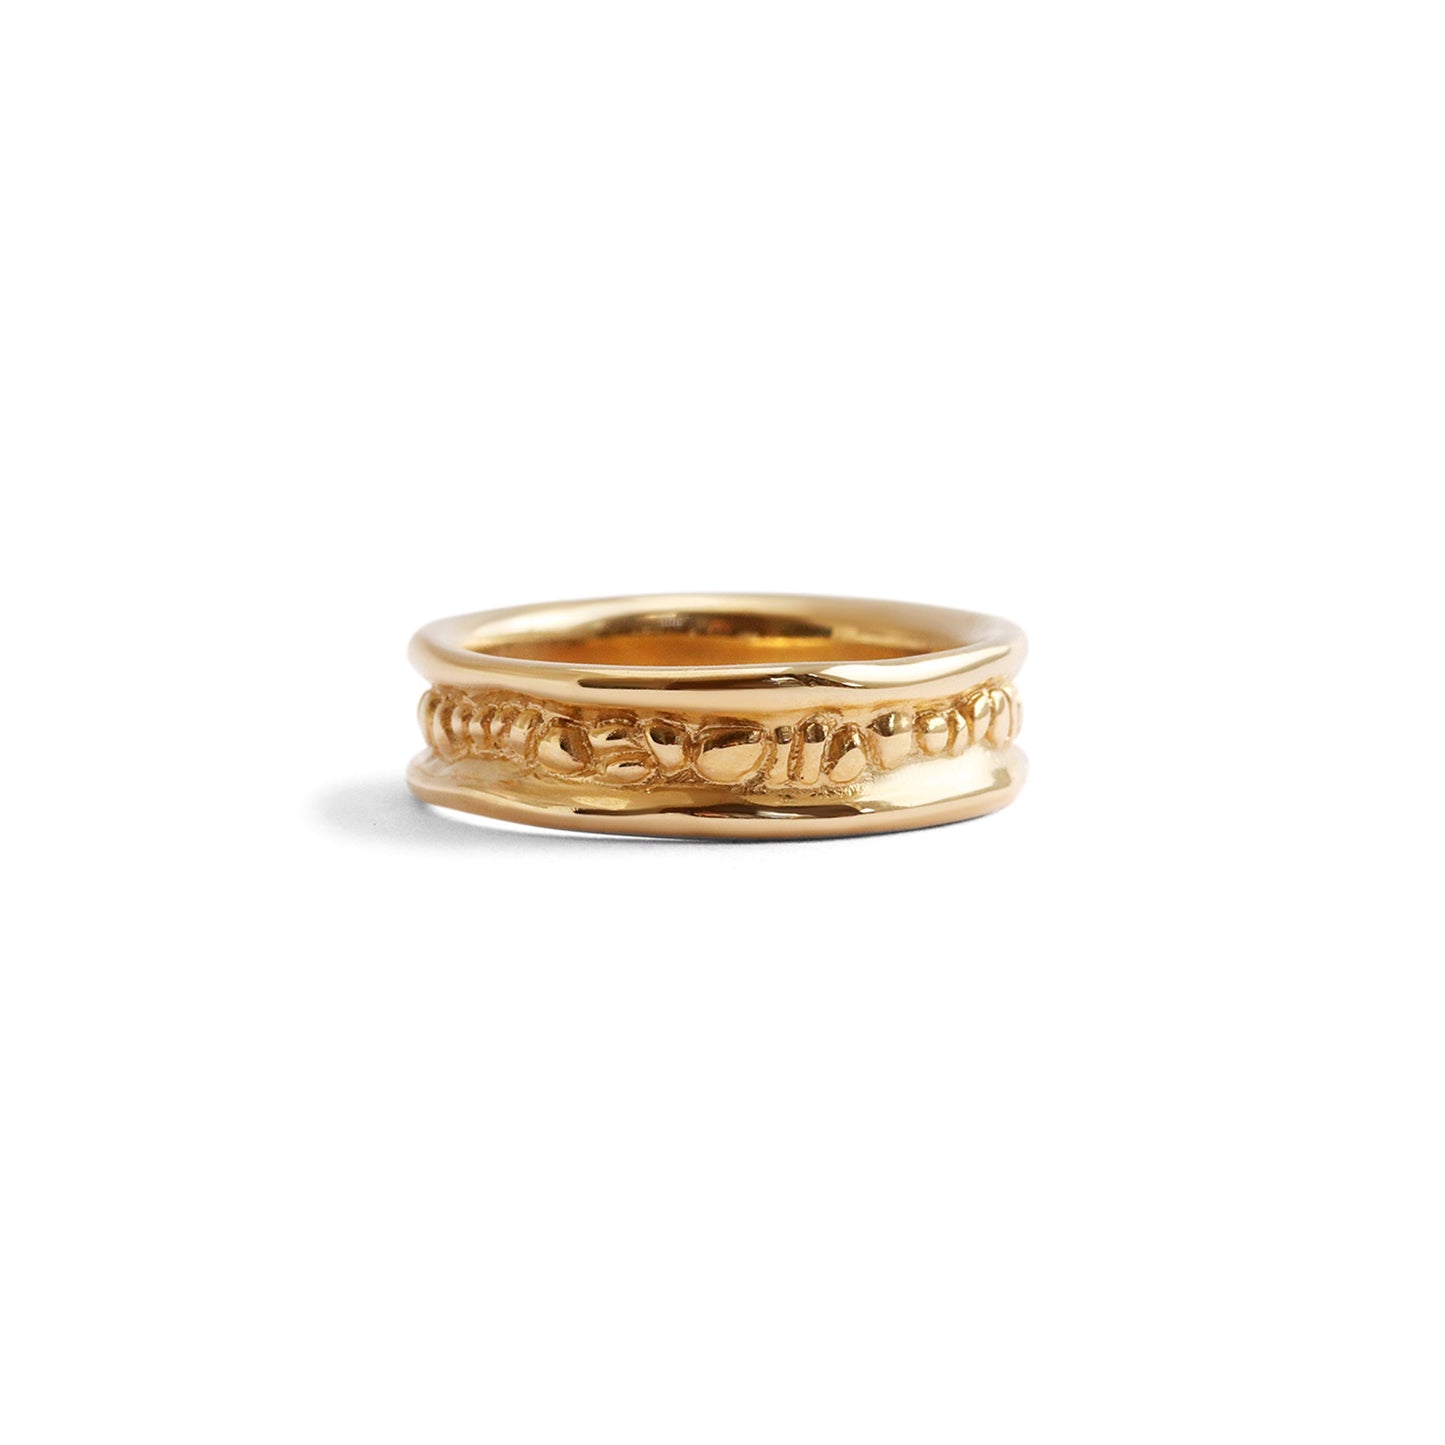 Load image into Gallery viewer, Ruins Ring / Polished Sides - Goldpoint Studio - Greenpoint, Brooklyn - Fine Jewelry
